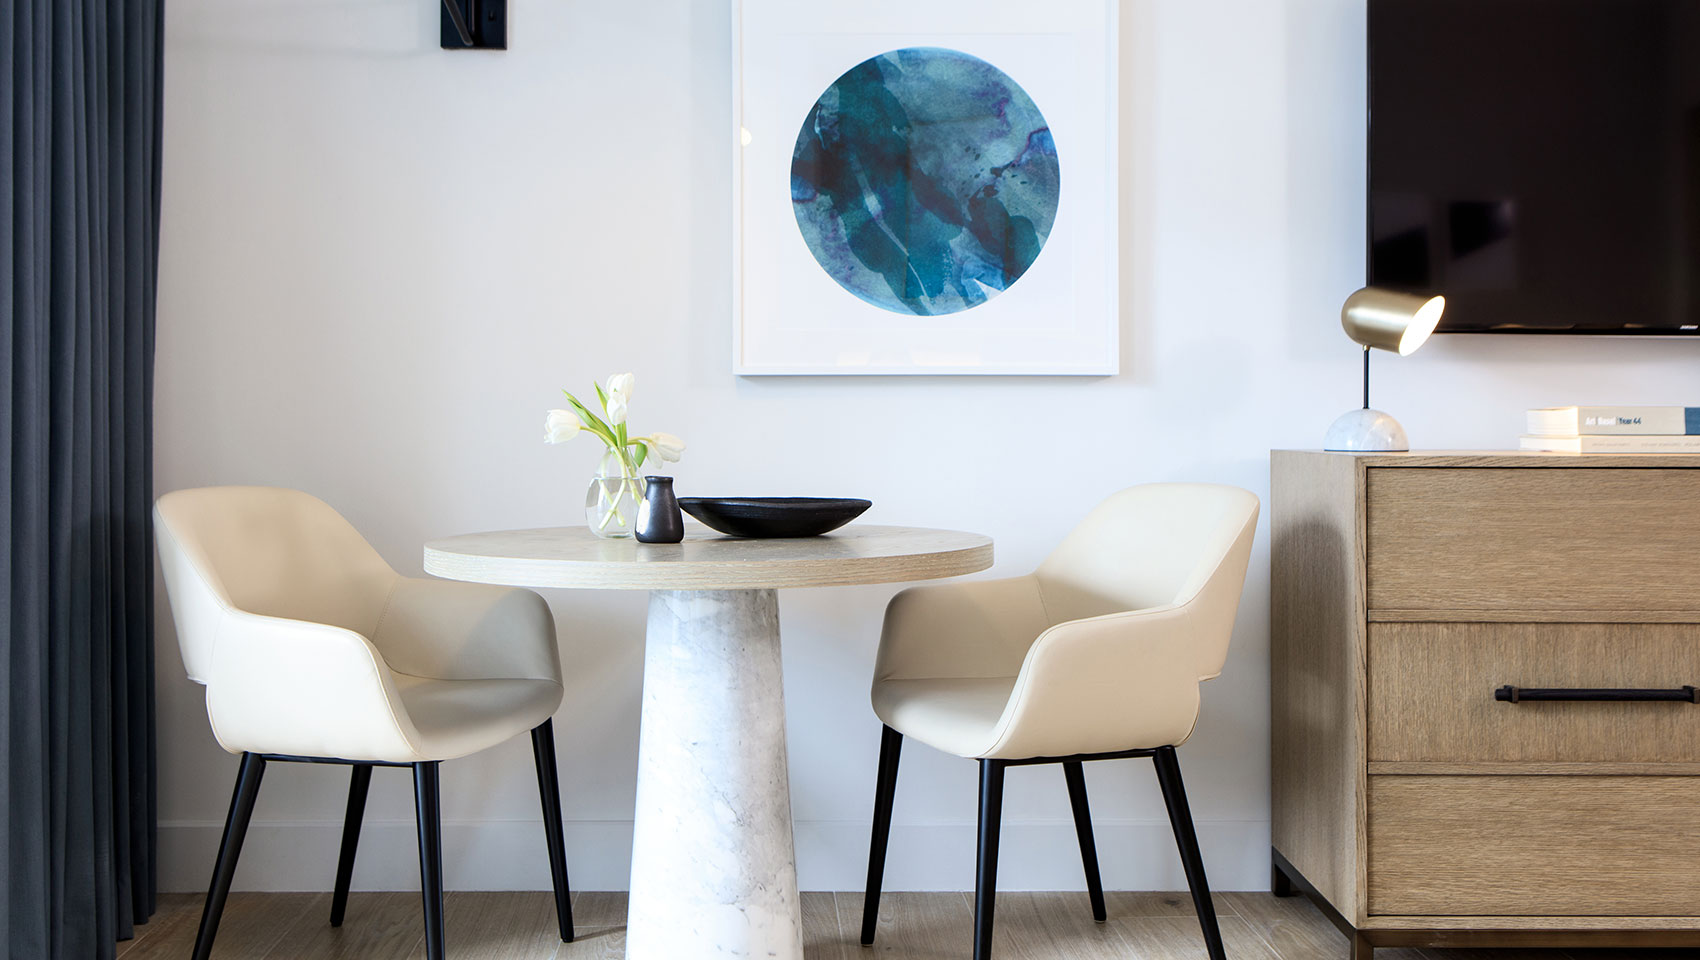 corner seating area with two beige chairs, marble coffee table and abstract blue artwork.